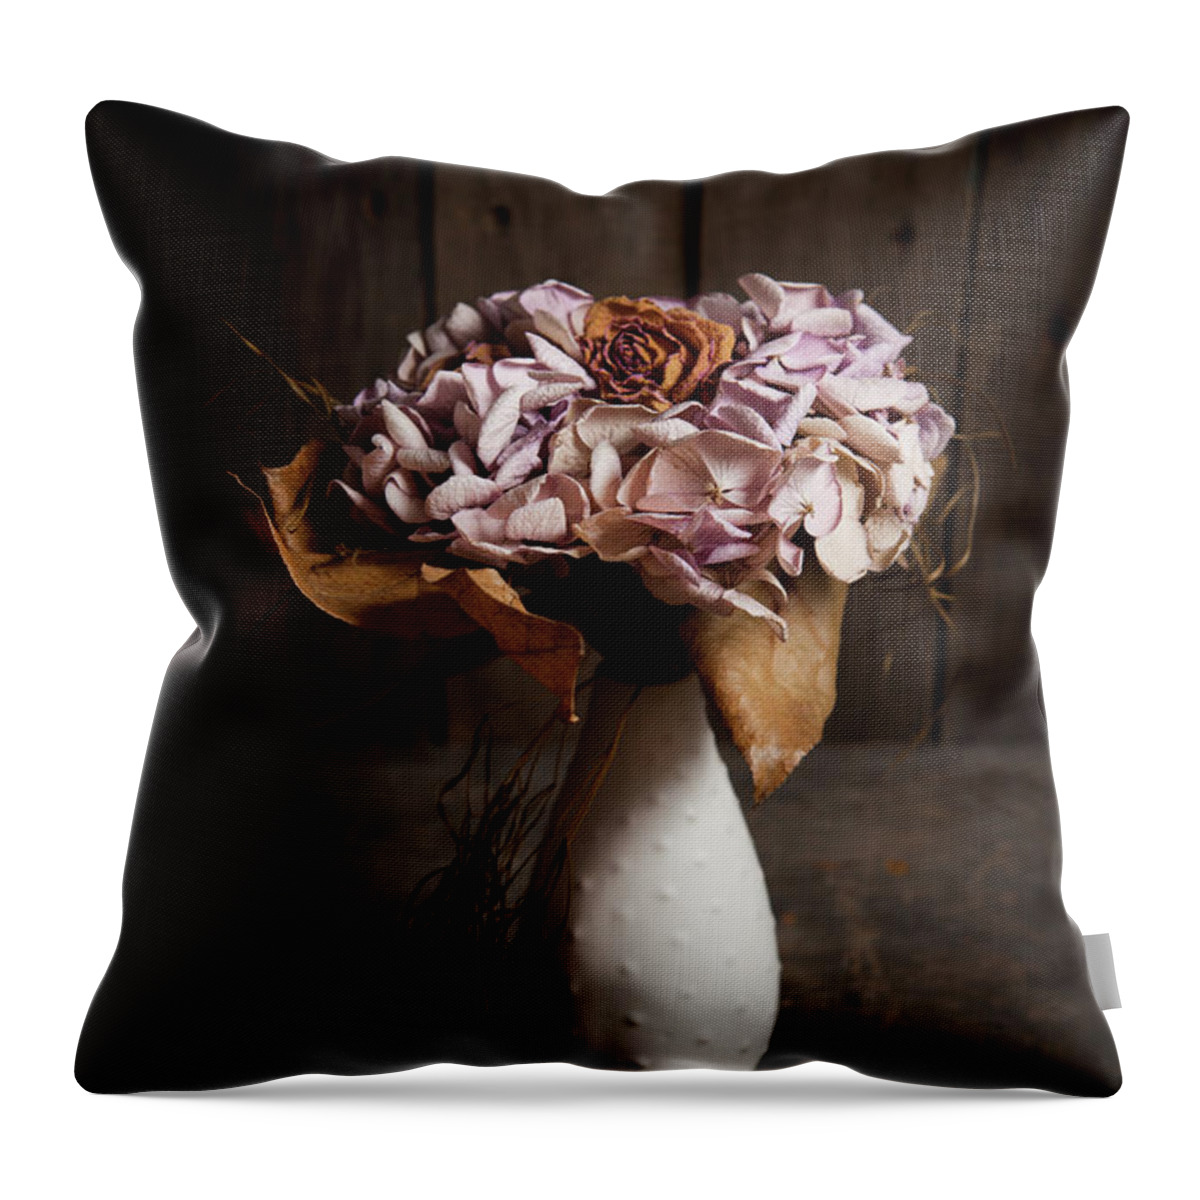 Vase Throw Pillow featuring the photograph Hydrangea And Rose Bouquet by Sematadesign